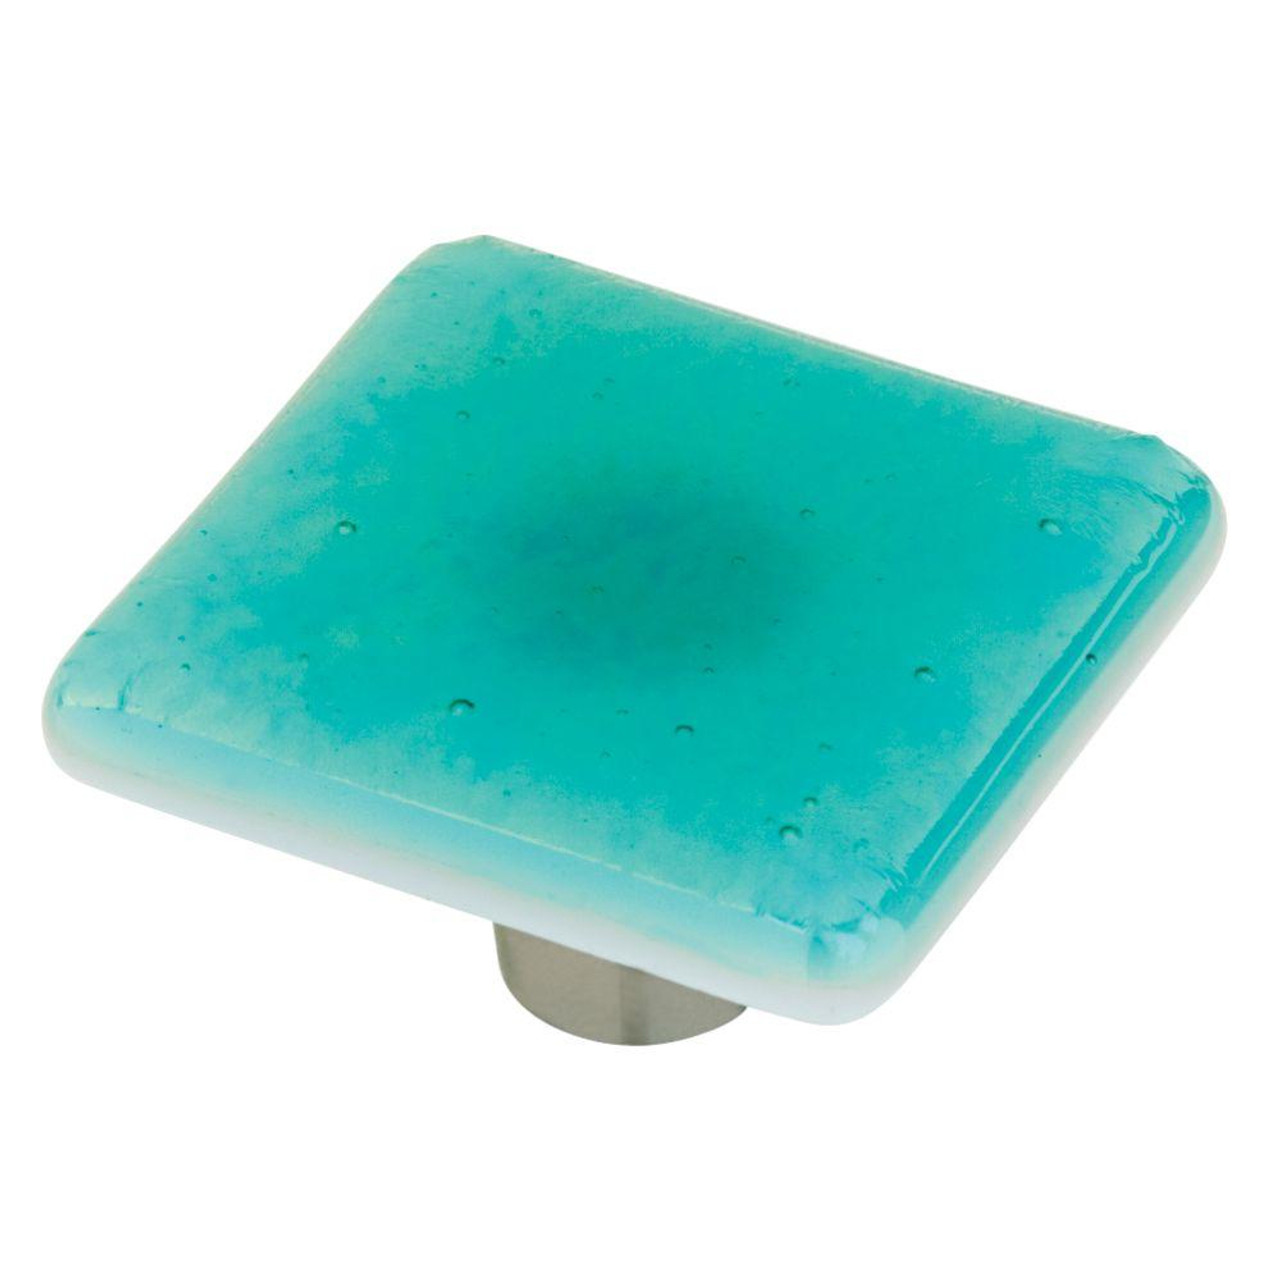 https://cdn11.bigcommerce.com/s-mul8093wwg/images/stencil/1280x1280/products/15295/35002/fused-glass-handmade-1-1-2-in-turquoise-iridescent-square-knob-lq-142954-1__52080.1657900327.jpg?c=1